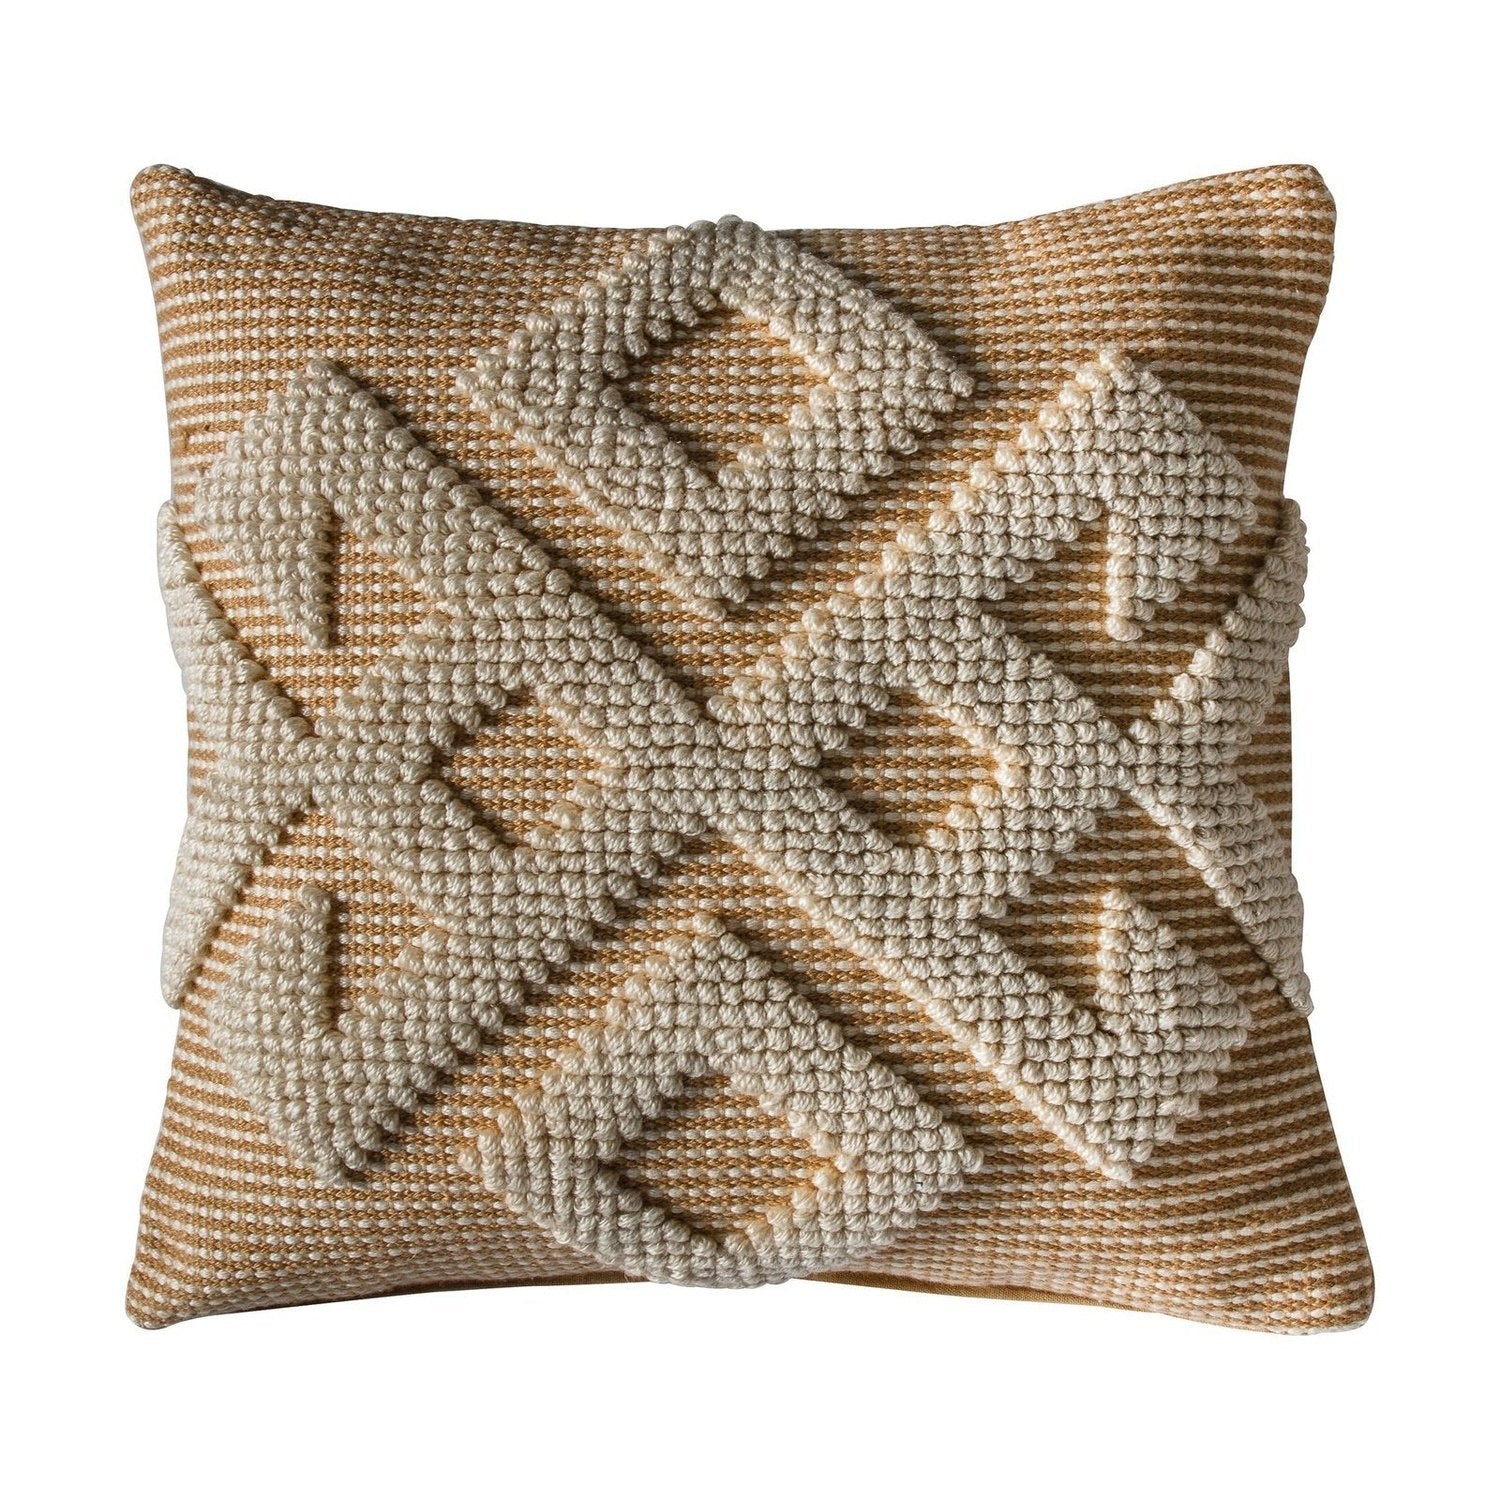 Aztec Natural Cushion 50cmx50cm - Feather Filled - Cosy Scandinavian Style